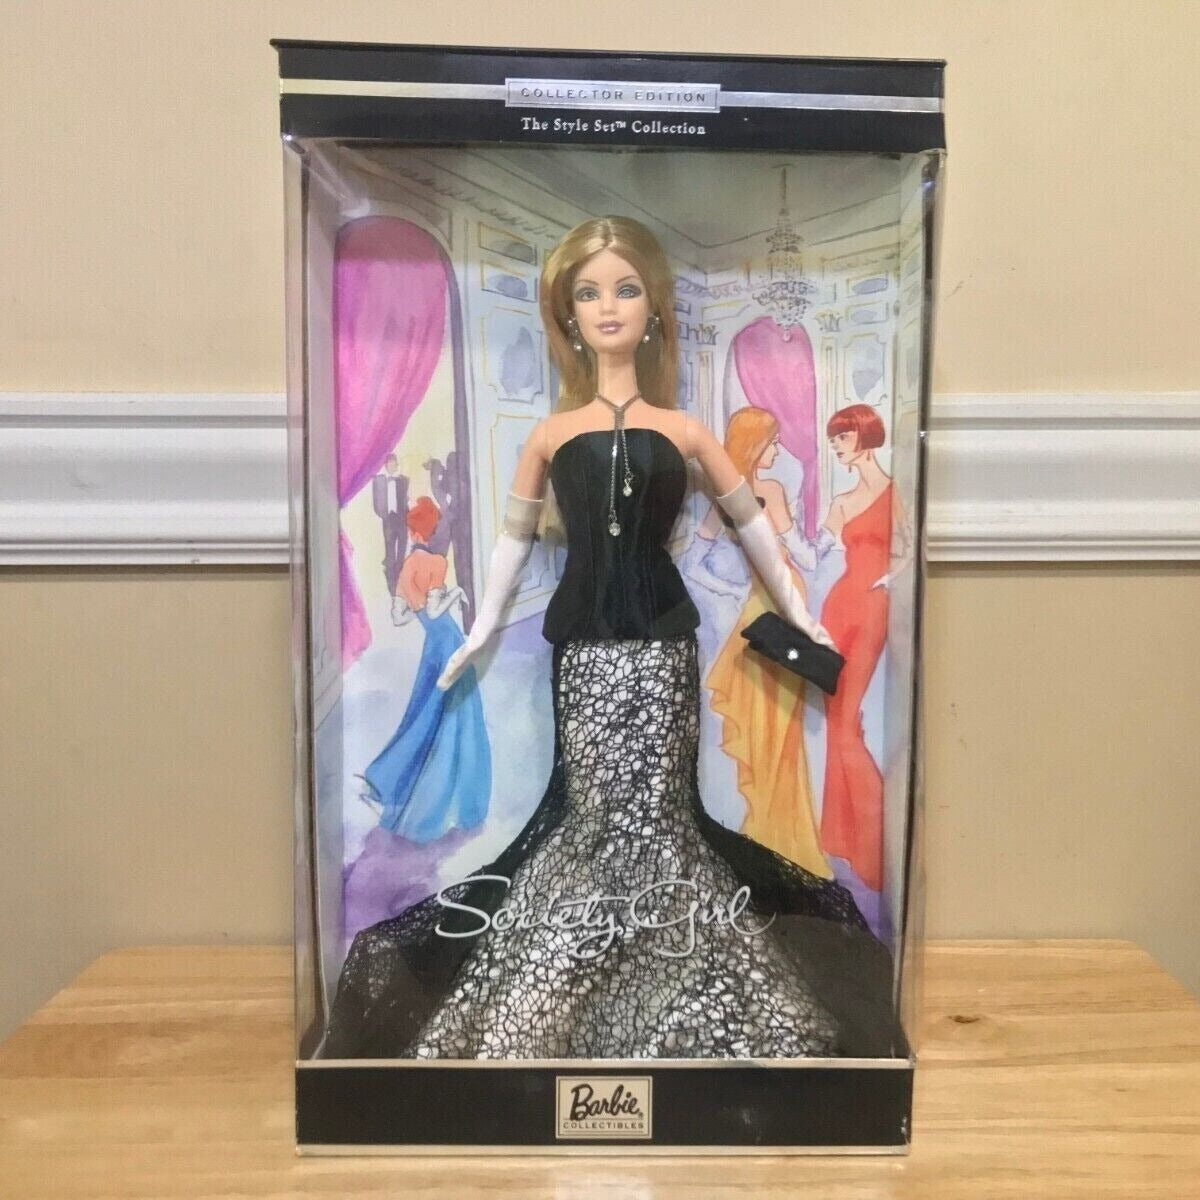 Barbie Society Girl Collector Edition 2001  Doll Gown shoes earrings purse stand